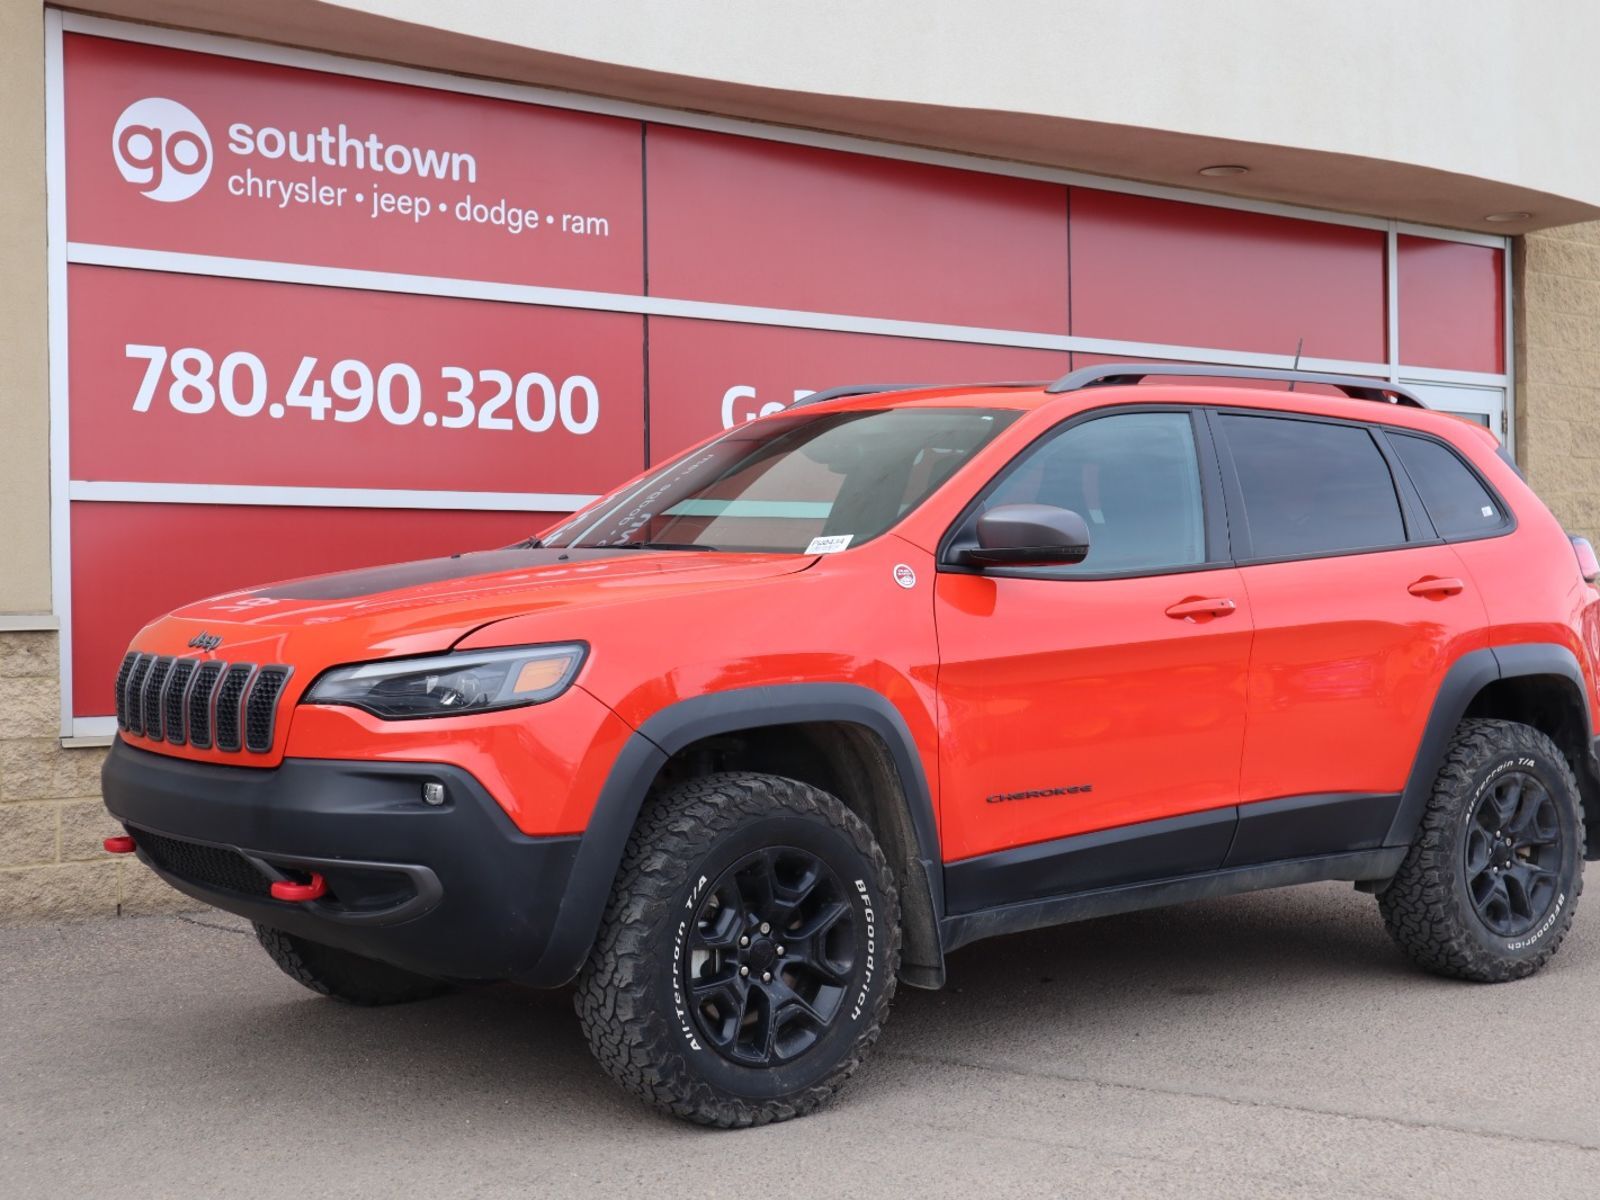 2021 Jeep Cherokee TRAILHAWK ELITE IN SPITFIRE ORANGE EQUIPPED WITH A